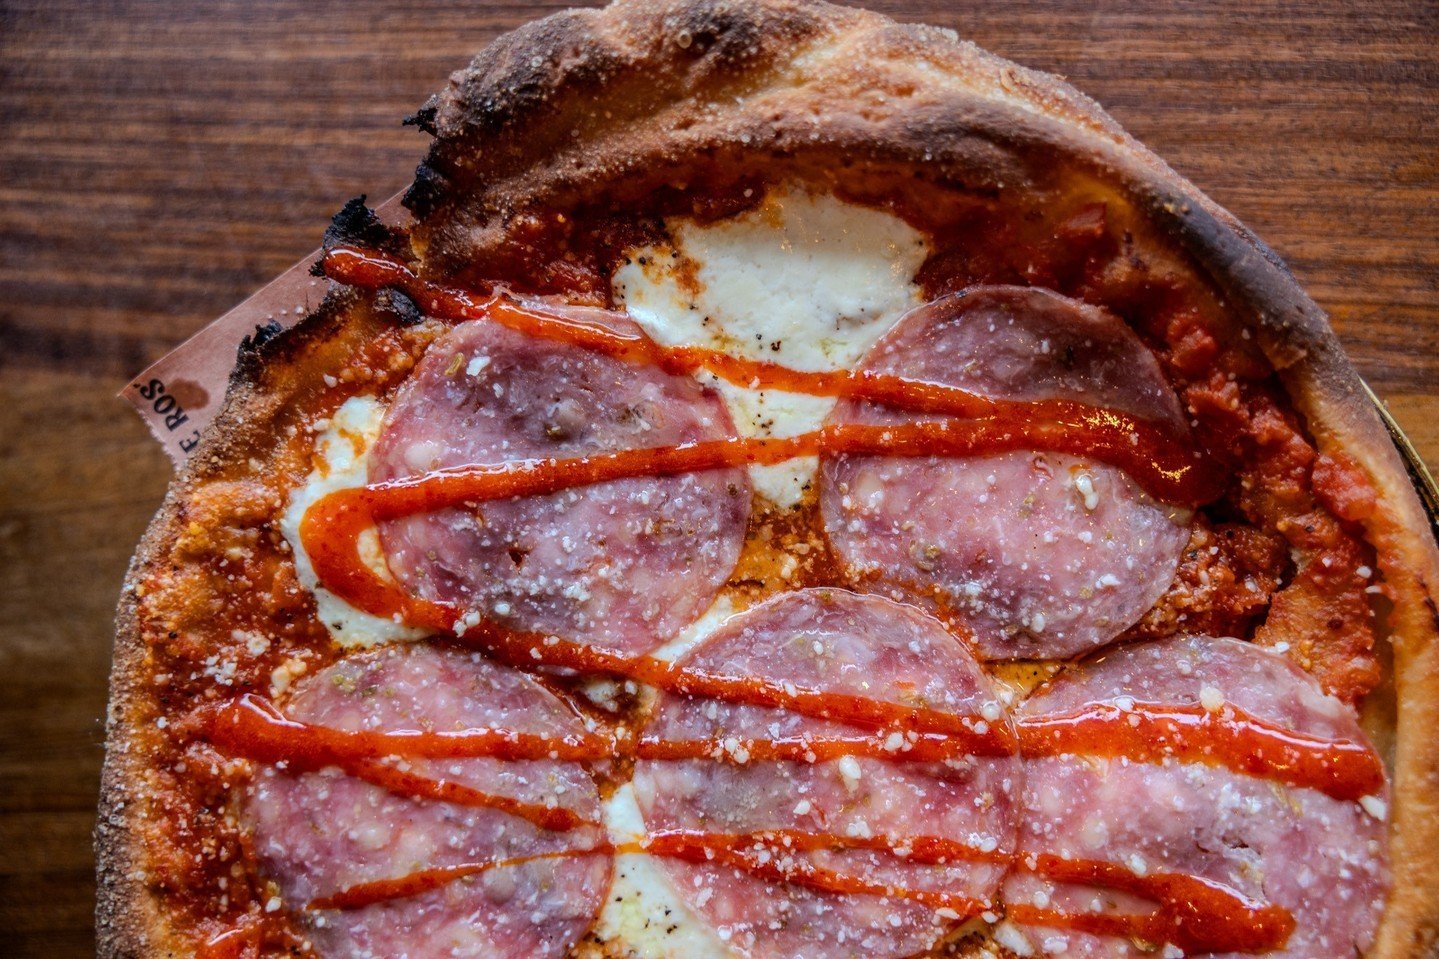 So take it... take another little *pizza* my heart 🍕🎶⁠
⁠
But you can't have an actual piece of my pizza, so back up 👀⁠
⁠
This beauty is too delicious to share 🤤⁠
⁠
Swipe to see the whole piece of the pie 😏⁠
⁠
🔥Hot Honey and Salami Pizza⁠
.⁠
.⁠
